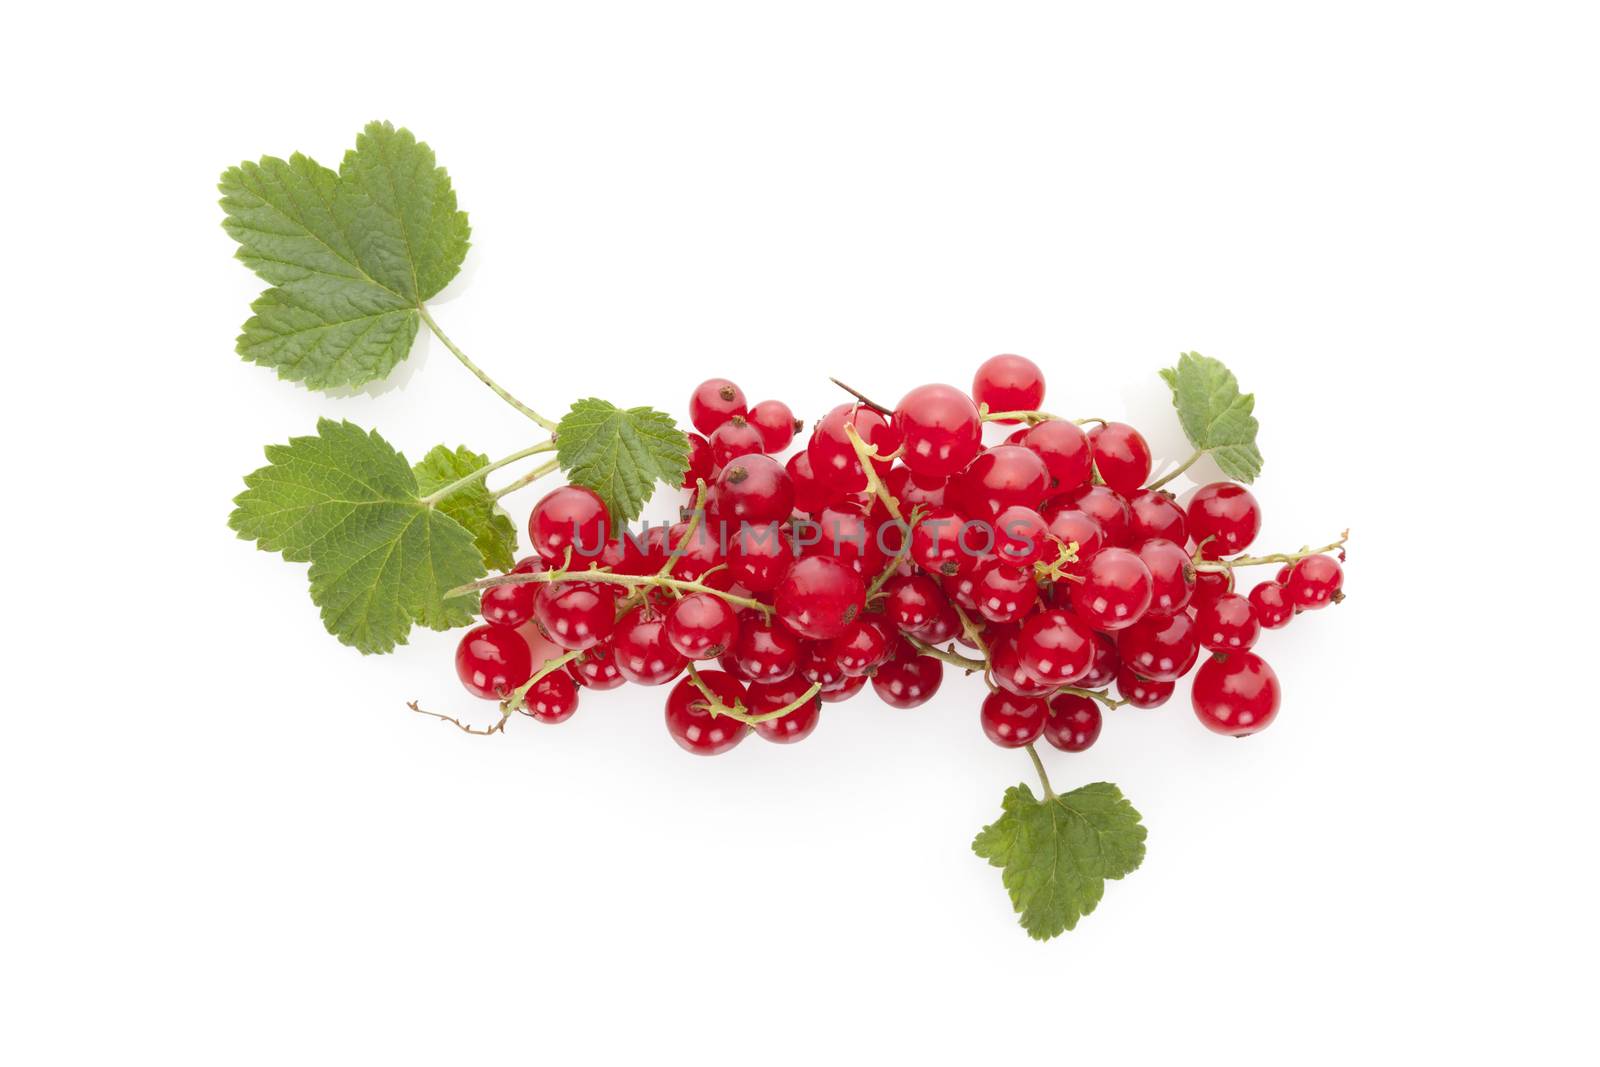 Red currant. by eskymaks